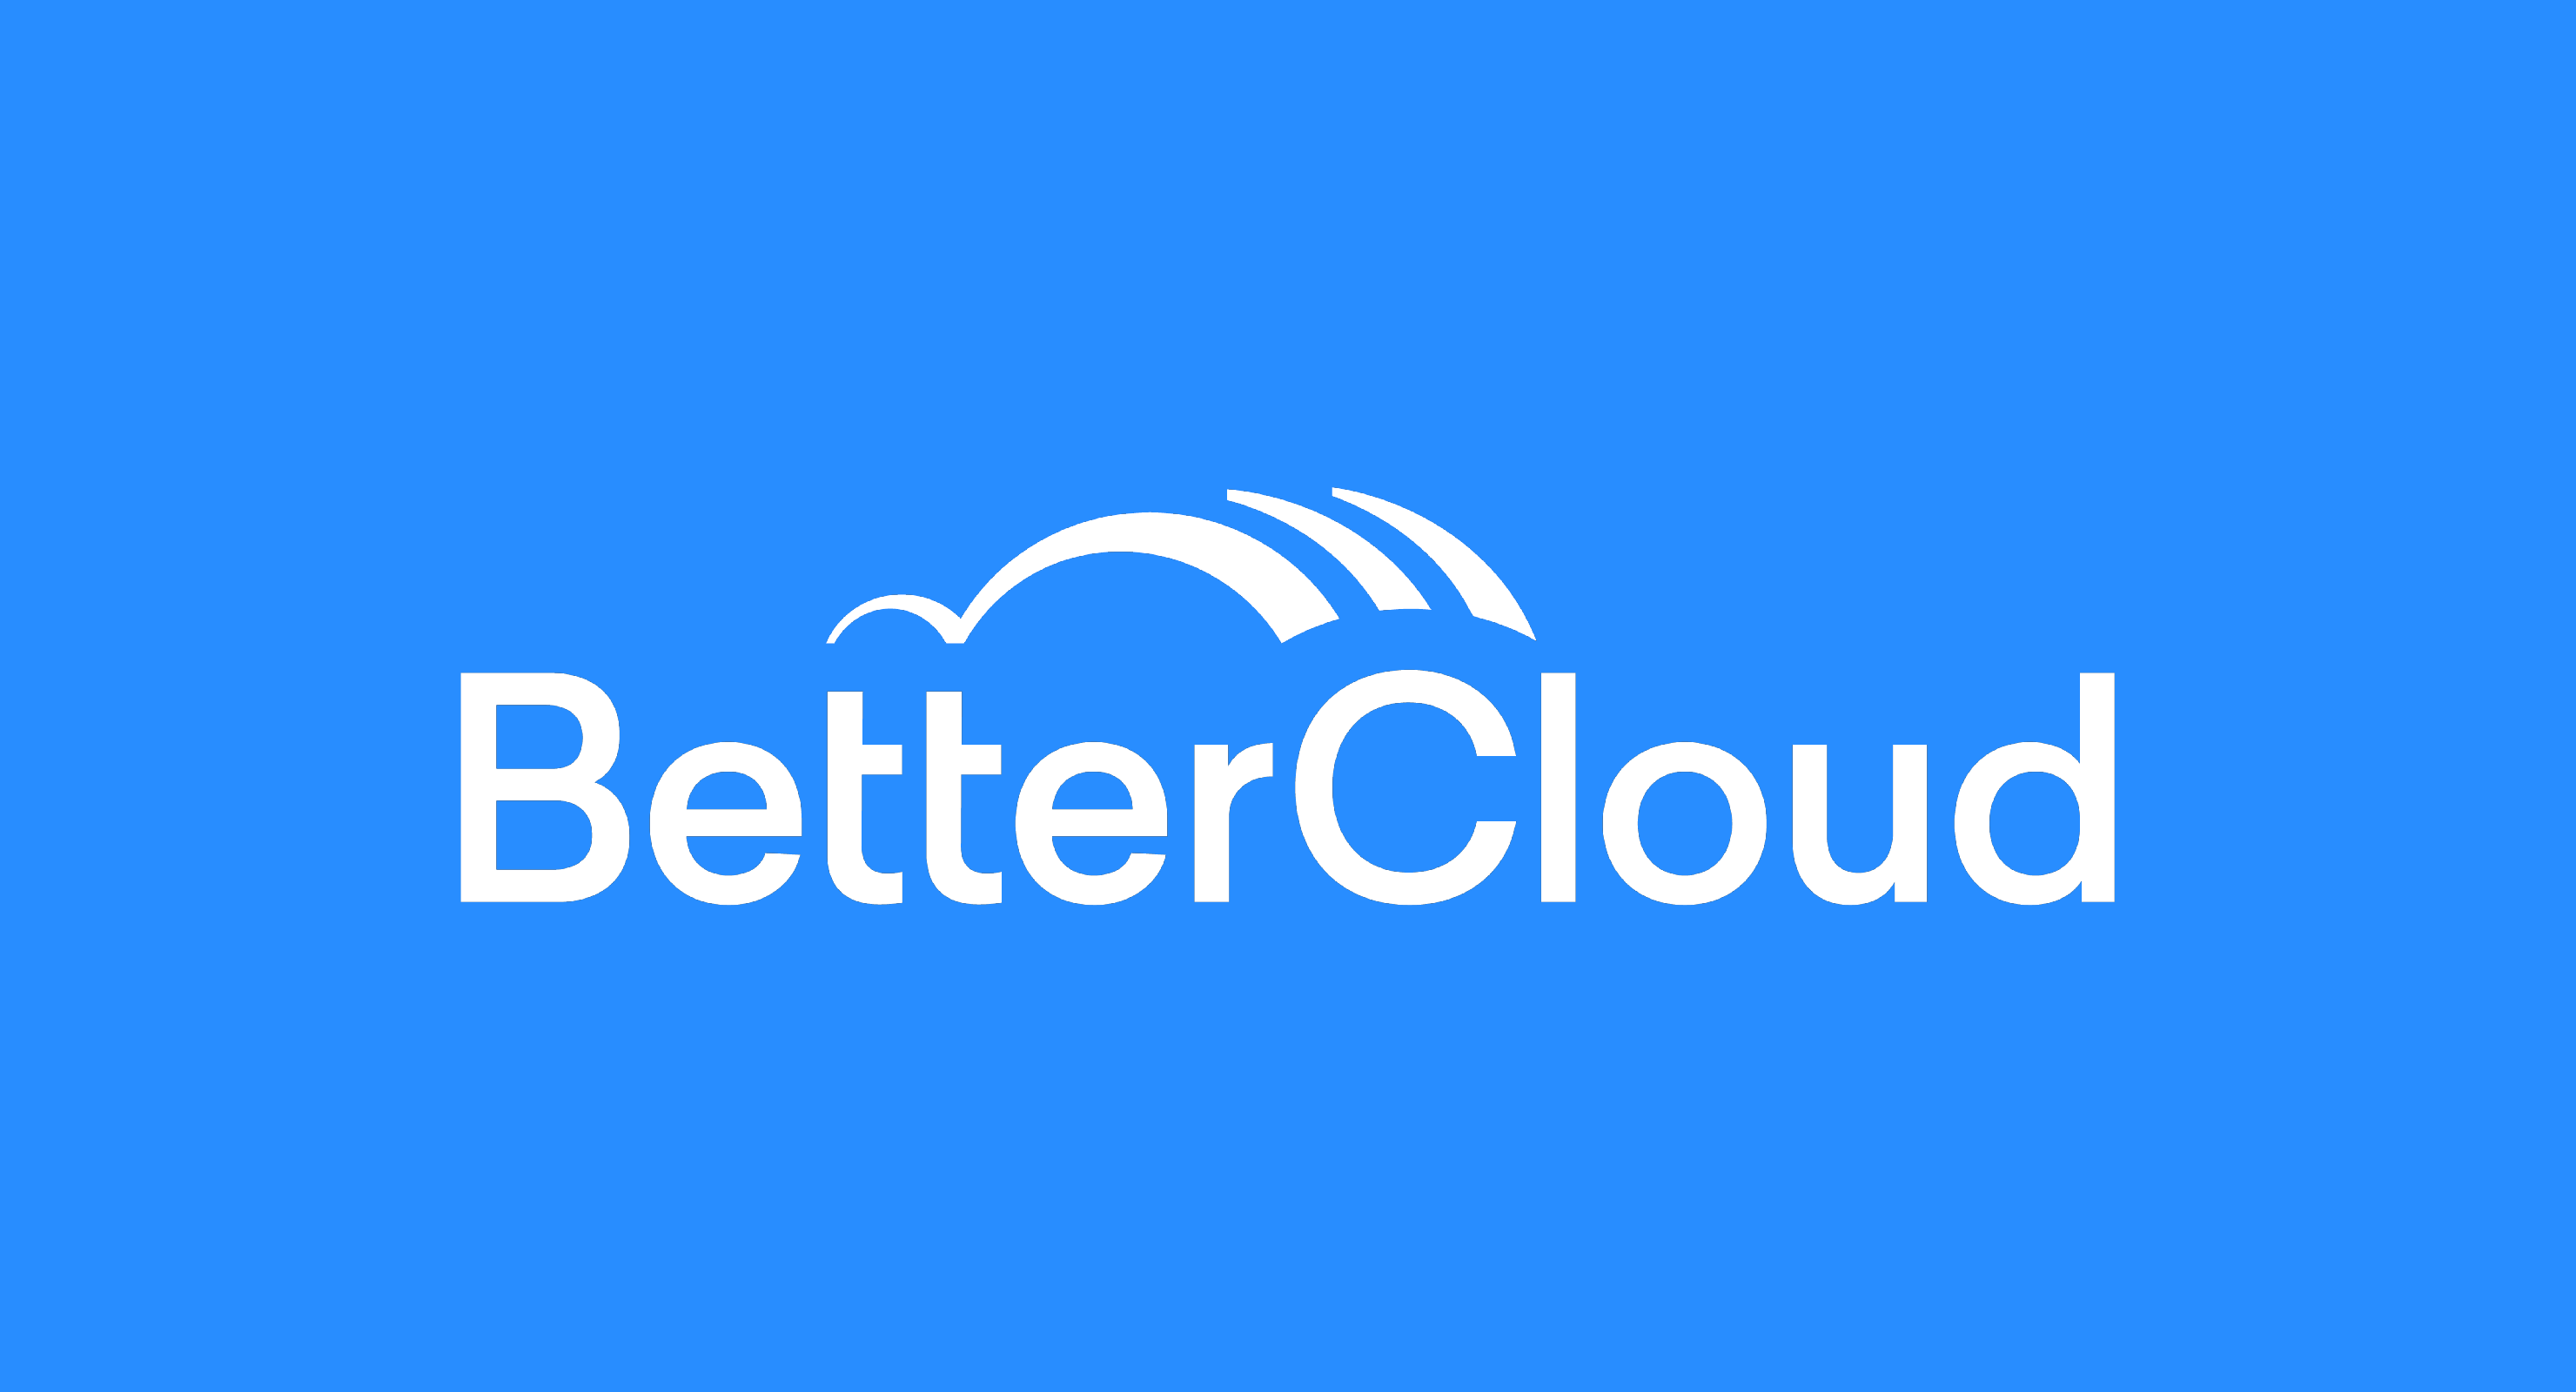 bettercloud rollworks g2 buyer intent case study